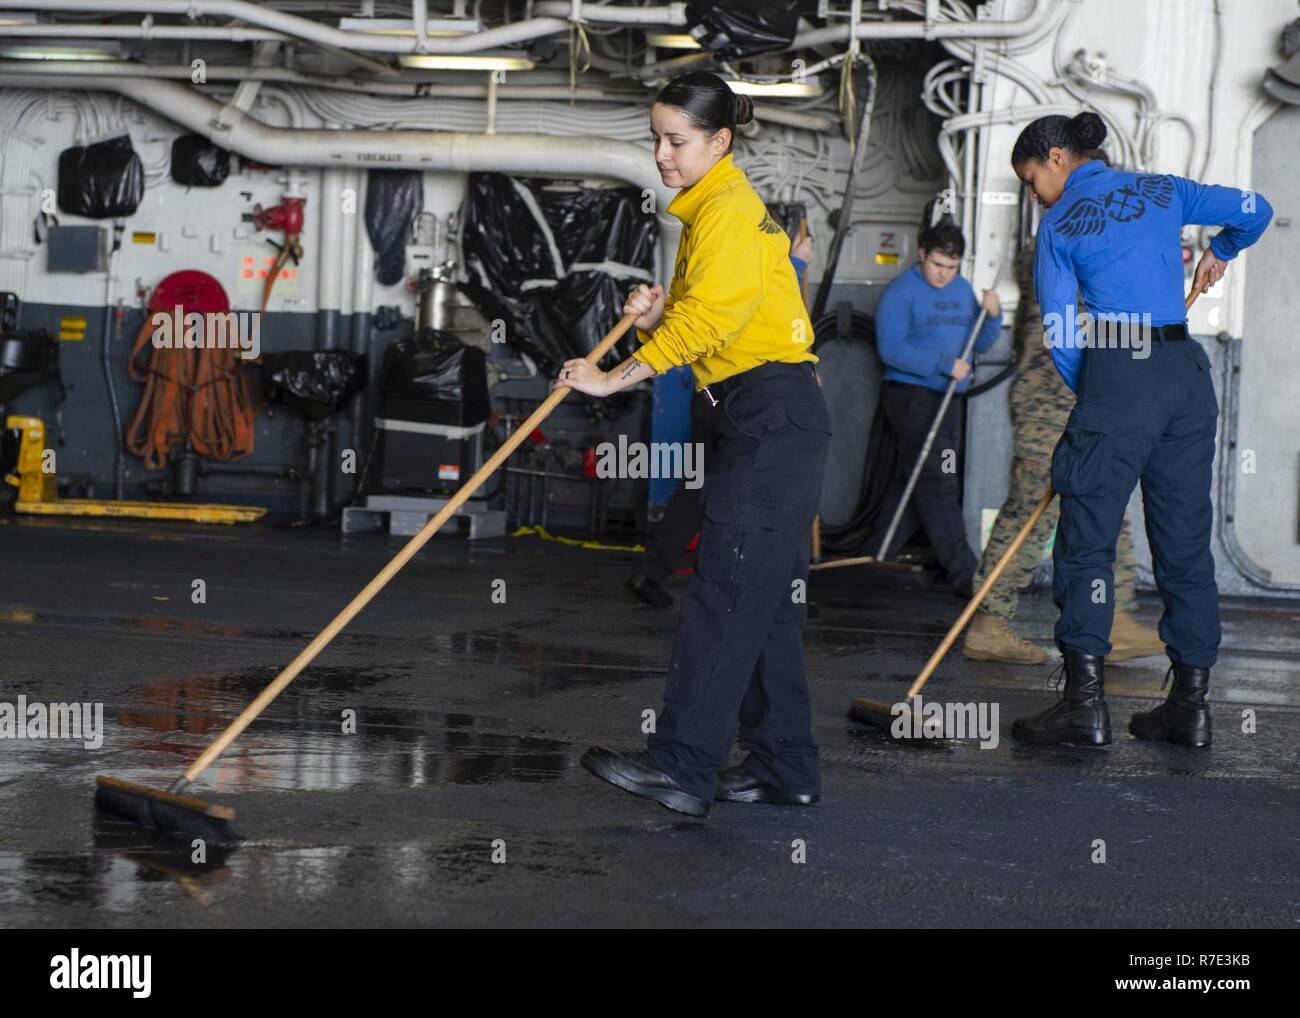 ATLANTIC OCEAN (Nov. 27, 2018) Aviation Boatswain’s Mate (Handling) 3rd Class Alejandra Lozada scrubs the hangar bay of the Wasp-class amphibious assault ship USS Iwo Jima (LHD 7), Nov. 27, 2018. Iwo Jima is currently underway after participating in Trident Juncture 2018 which is a NATO-led exercise designed to certify NATO response forces and develop interoperability among participating NATO Allied and partner nations. Stock Photo